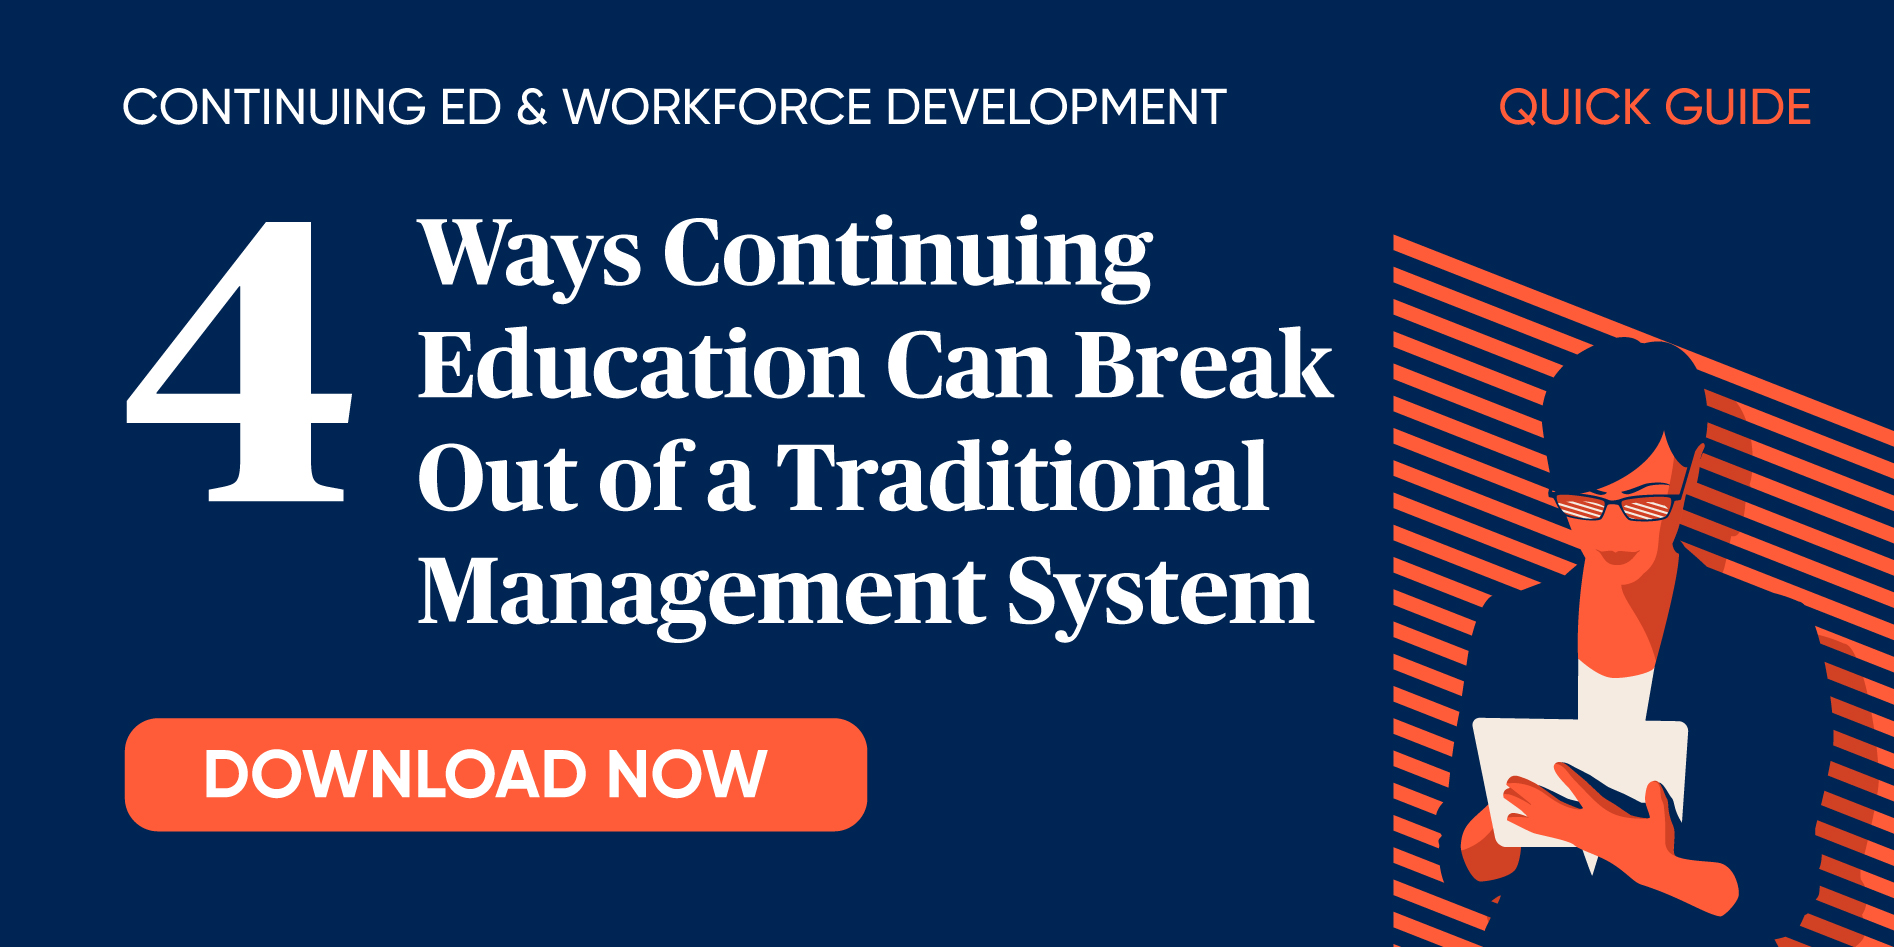 4 Ways CE Can Break Out of a Traditional Management System